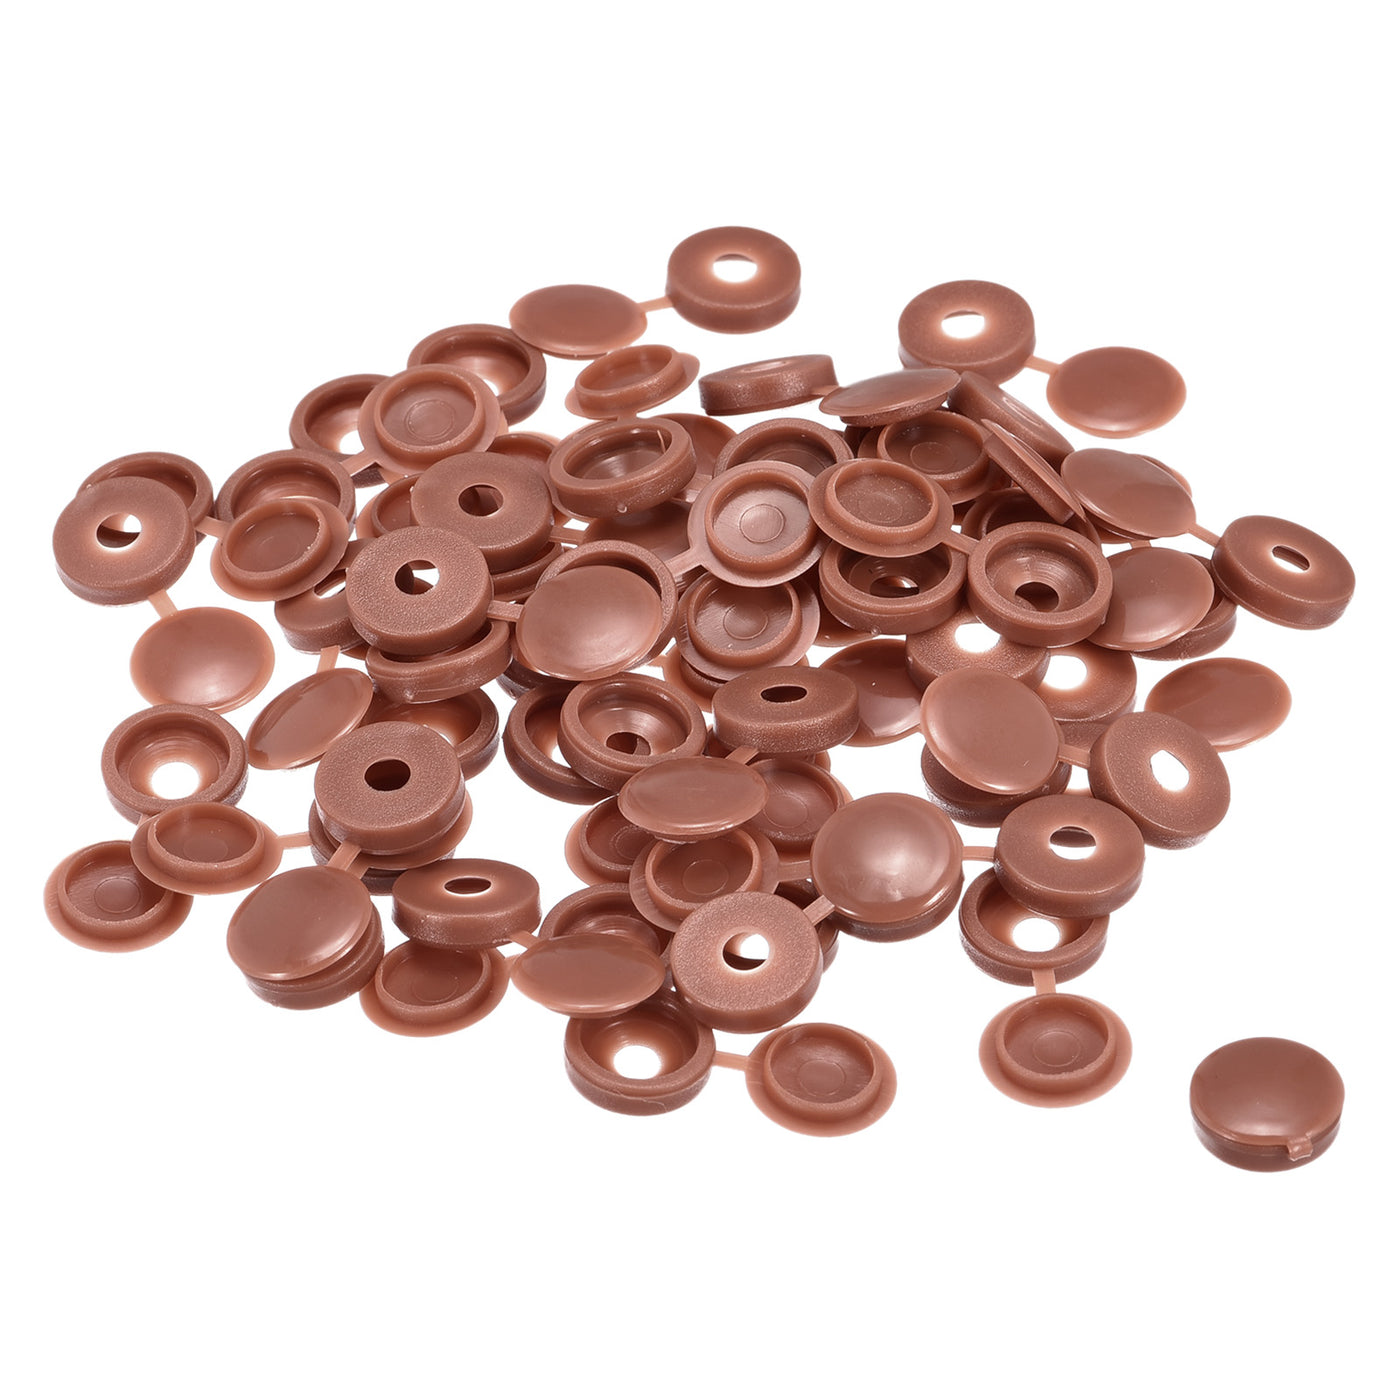 uxcell Uxcell 150Pcs 5mm Hinged Screw Cover Caps Plastic Fold Screw Snap Covers, Brown